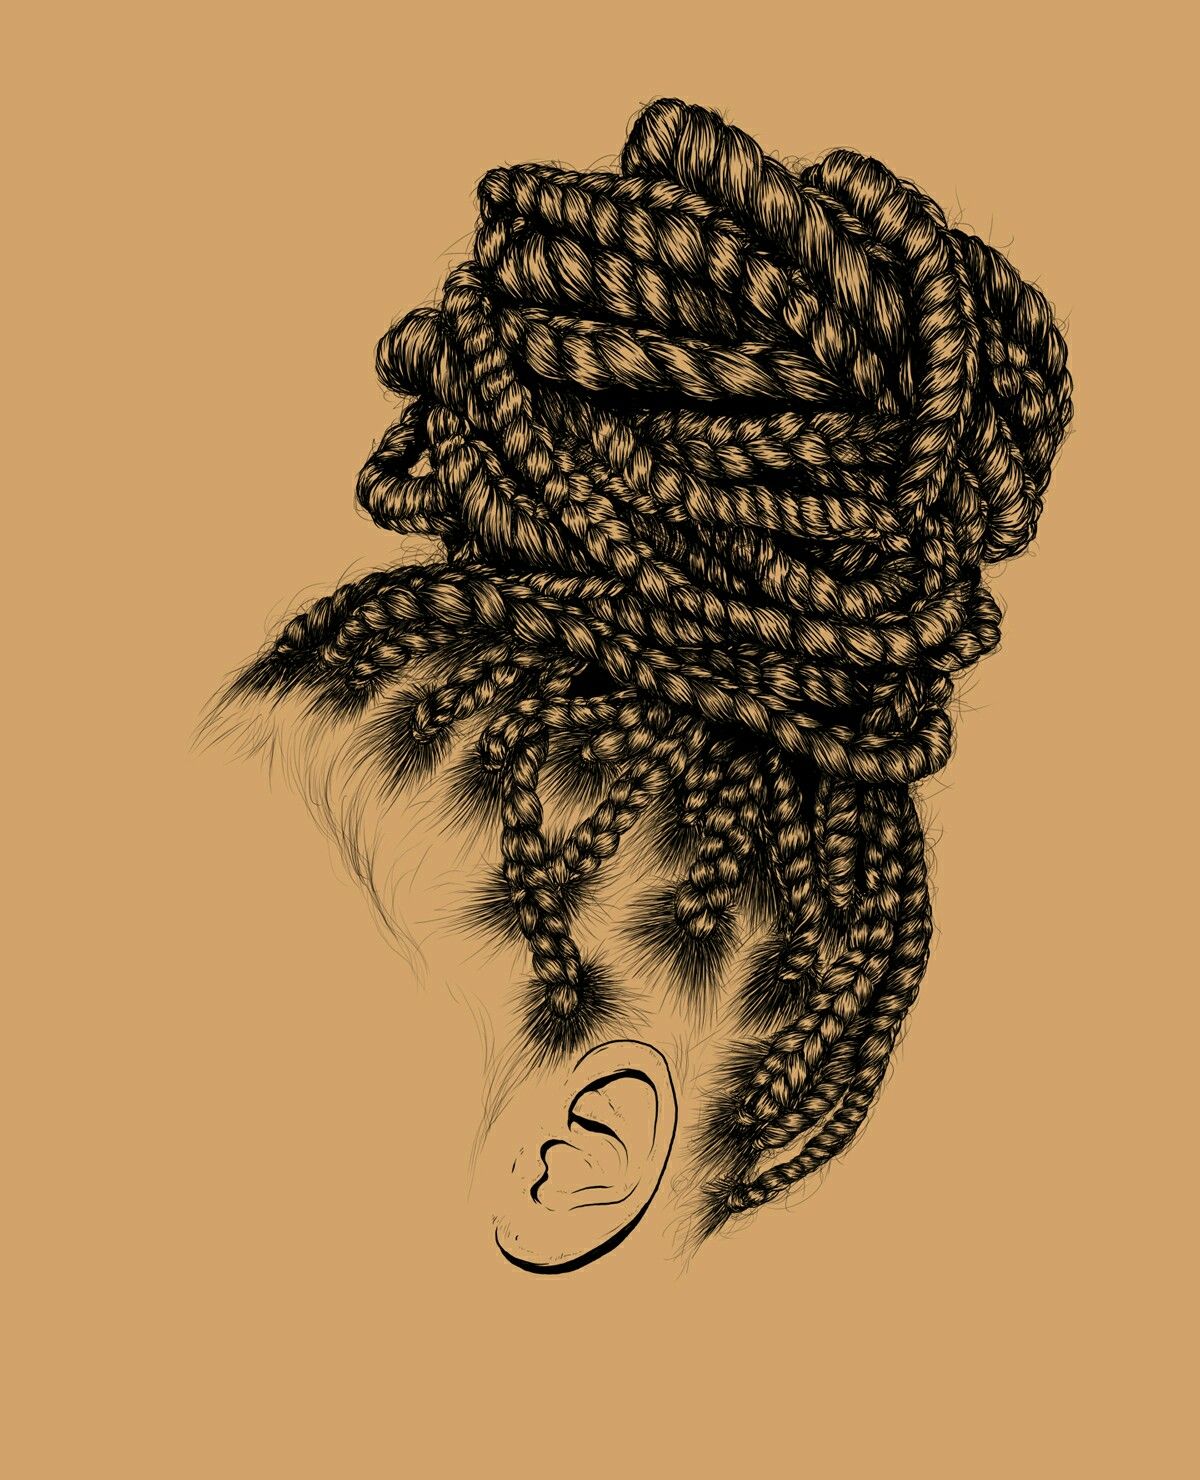 Black Girl With Braids Drawing at PaintingValley.com | Explore ...